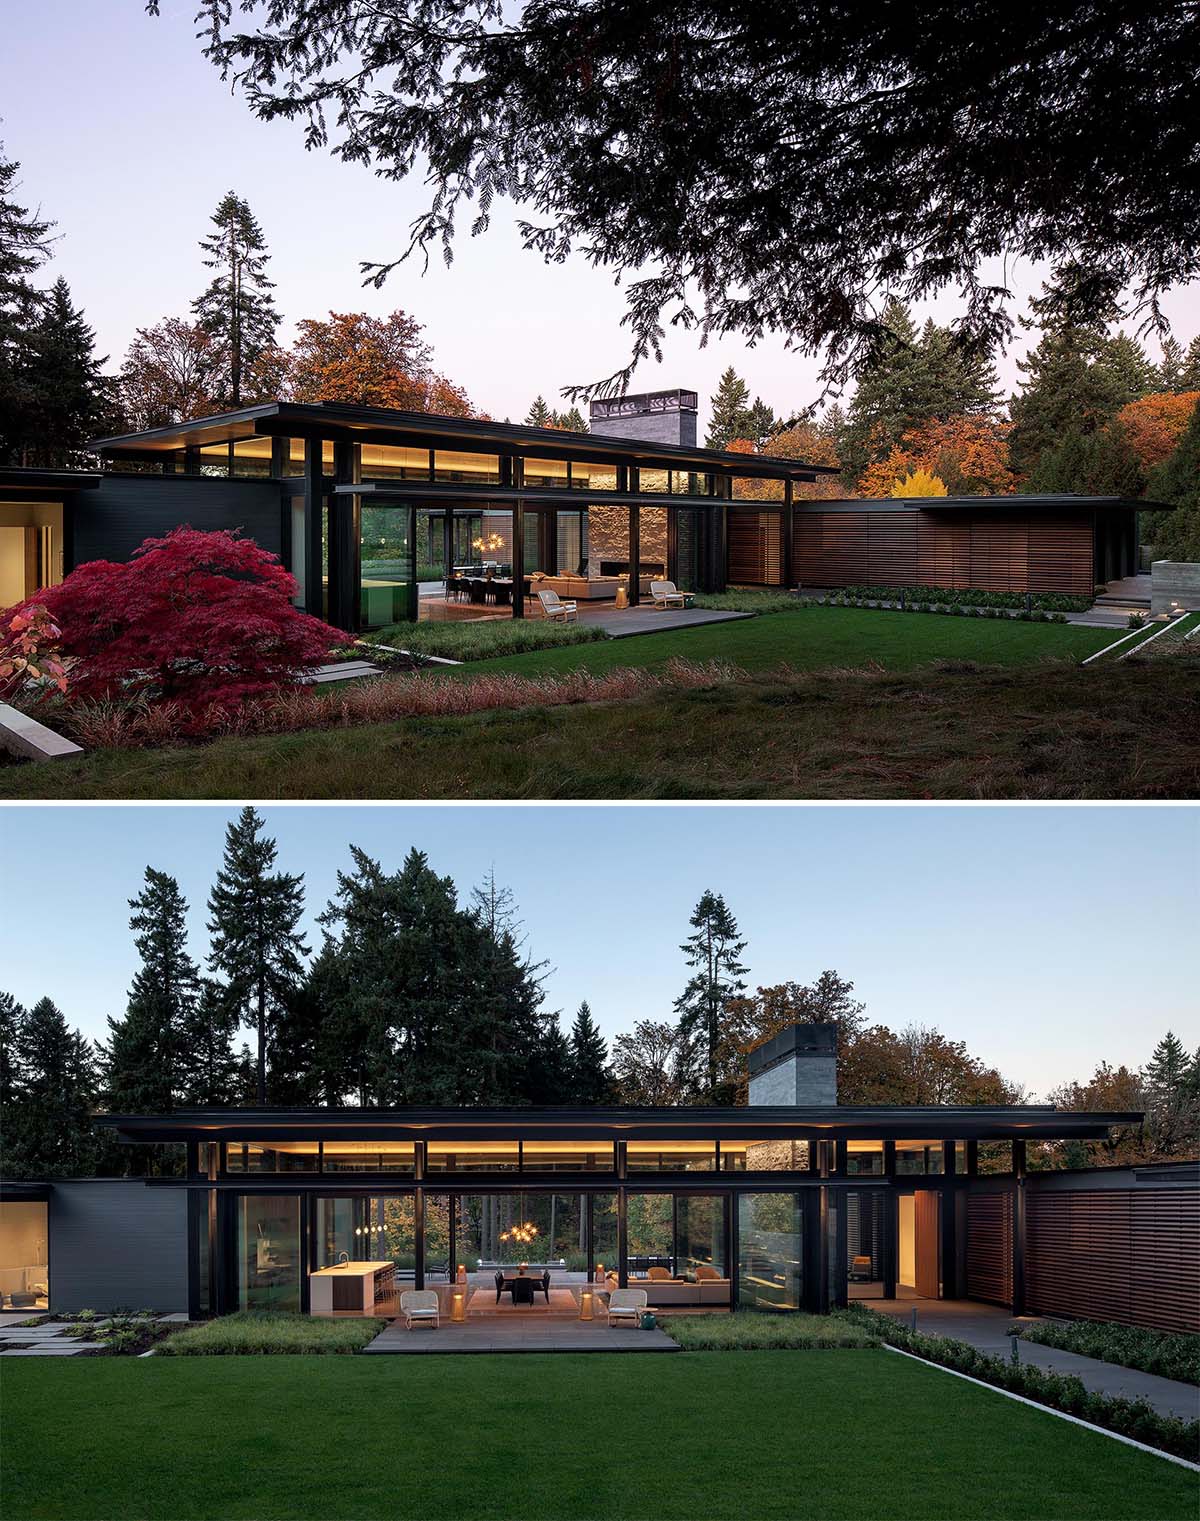 The home, which is nestled into the hillside, has a simple palette of wood, steel, stone, and glass.